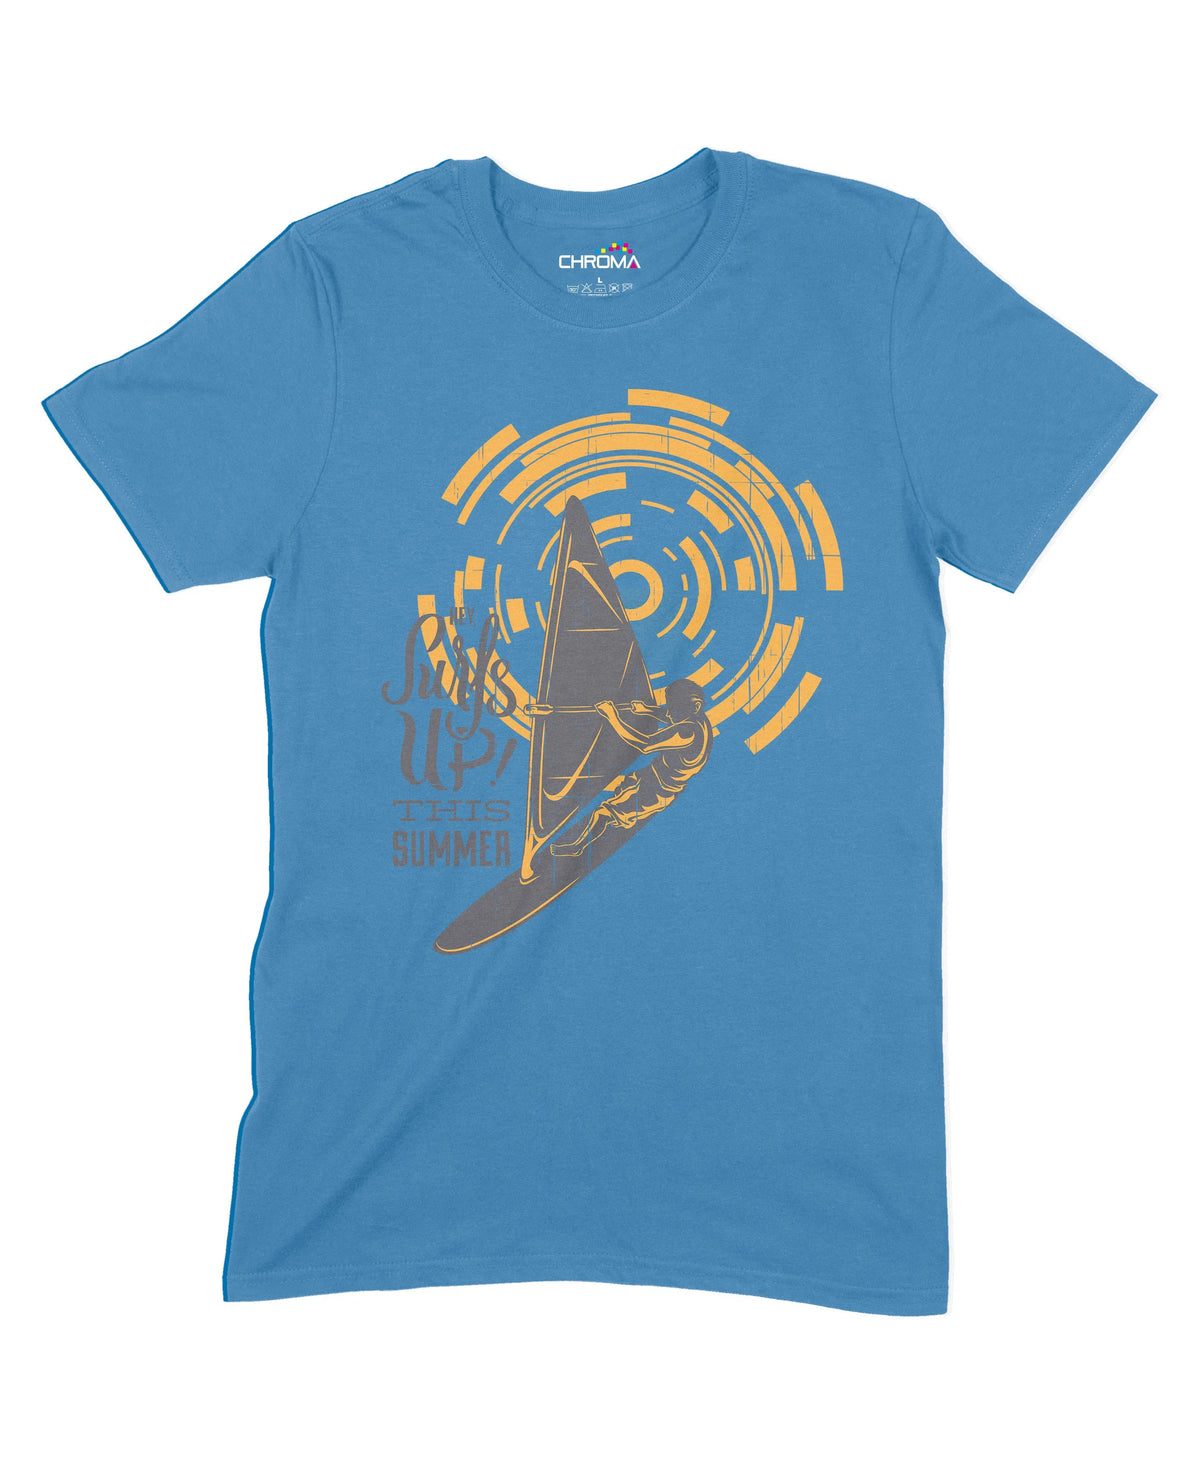 Surfs Up This Summer Unisex Adult T-Shirt Chroma Clothing